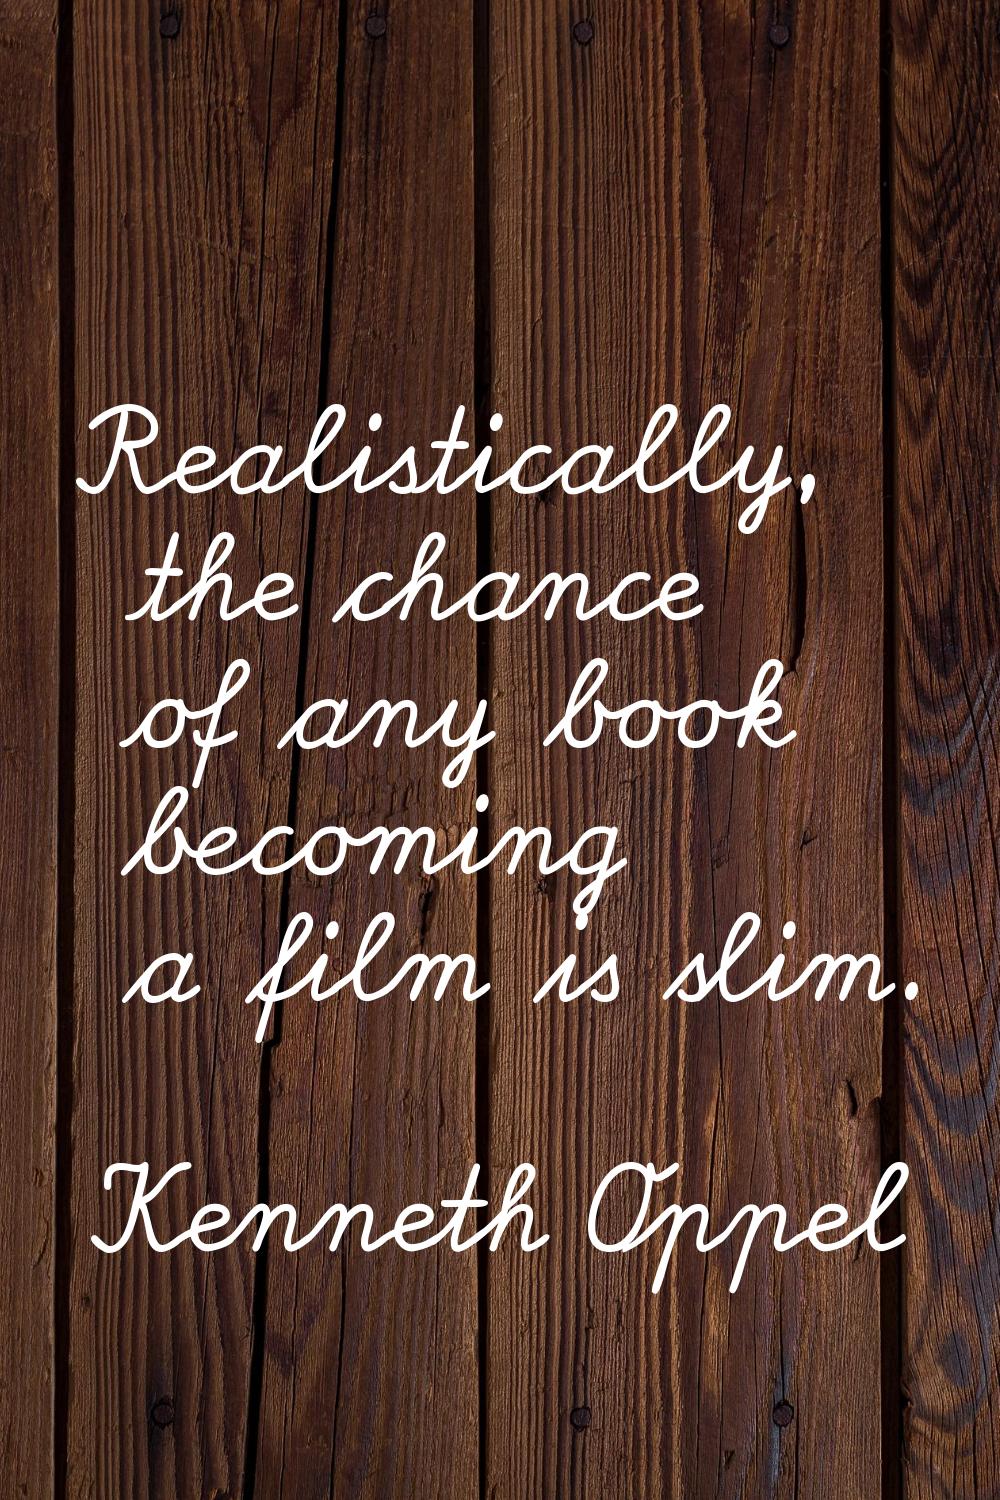 Realistically, the chance of any book becoming a film is slim.